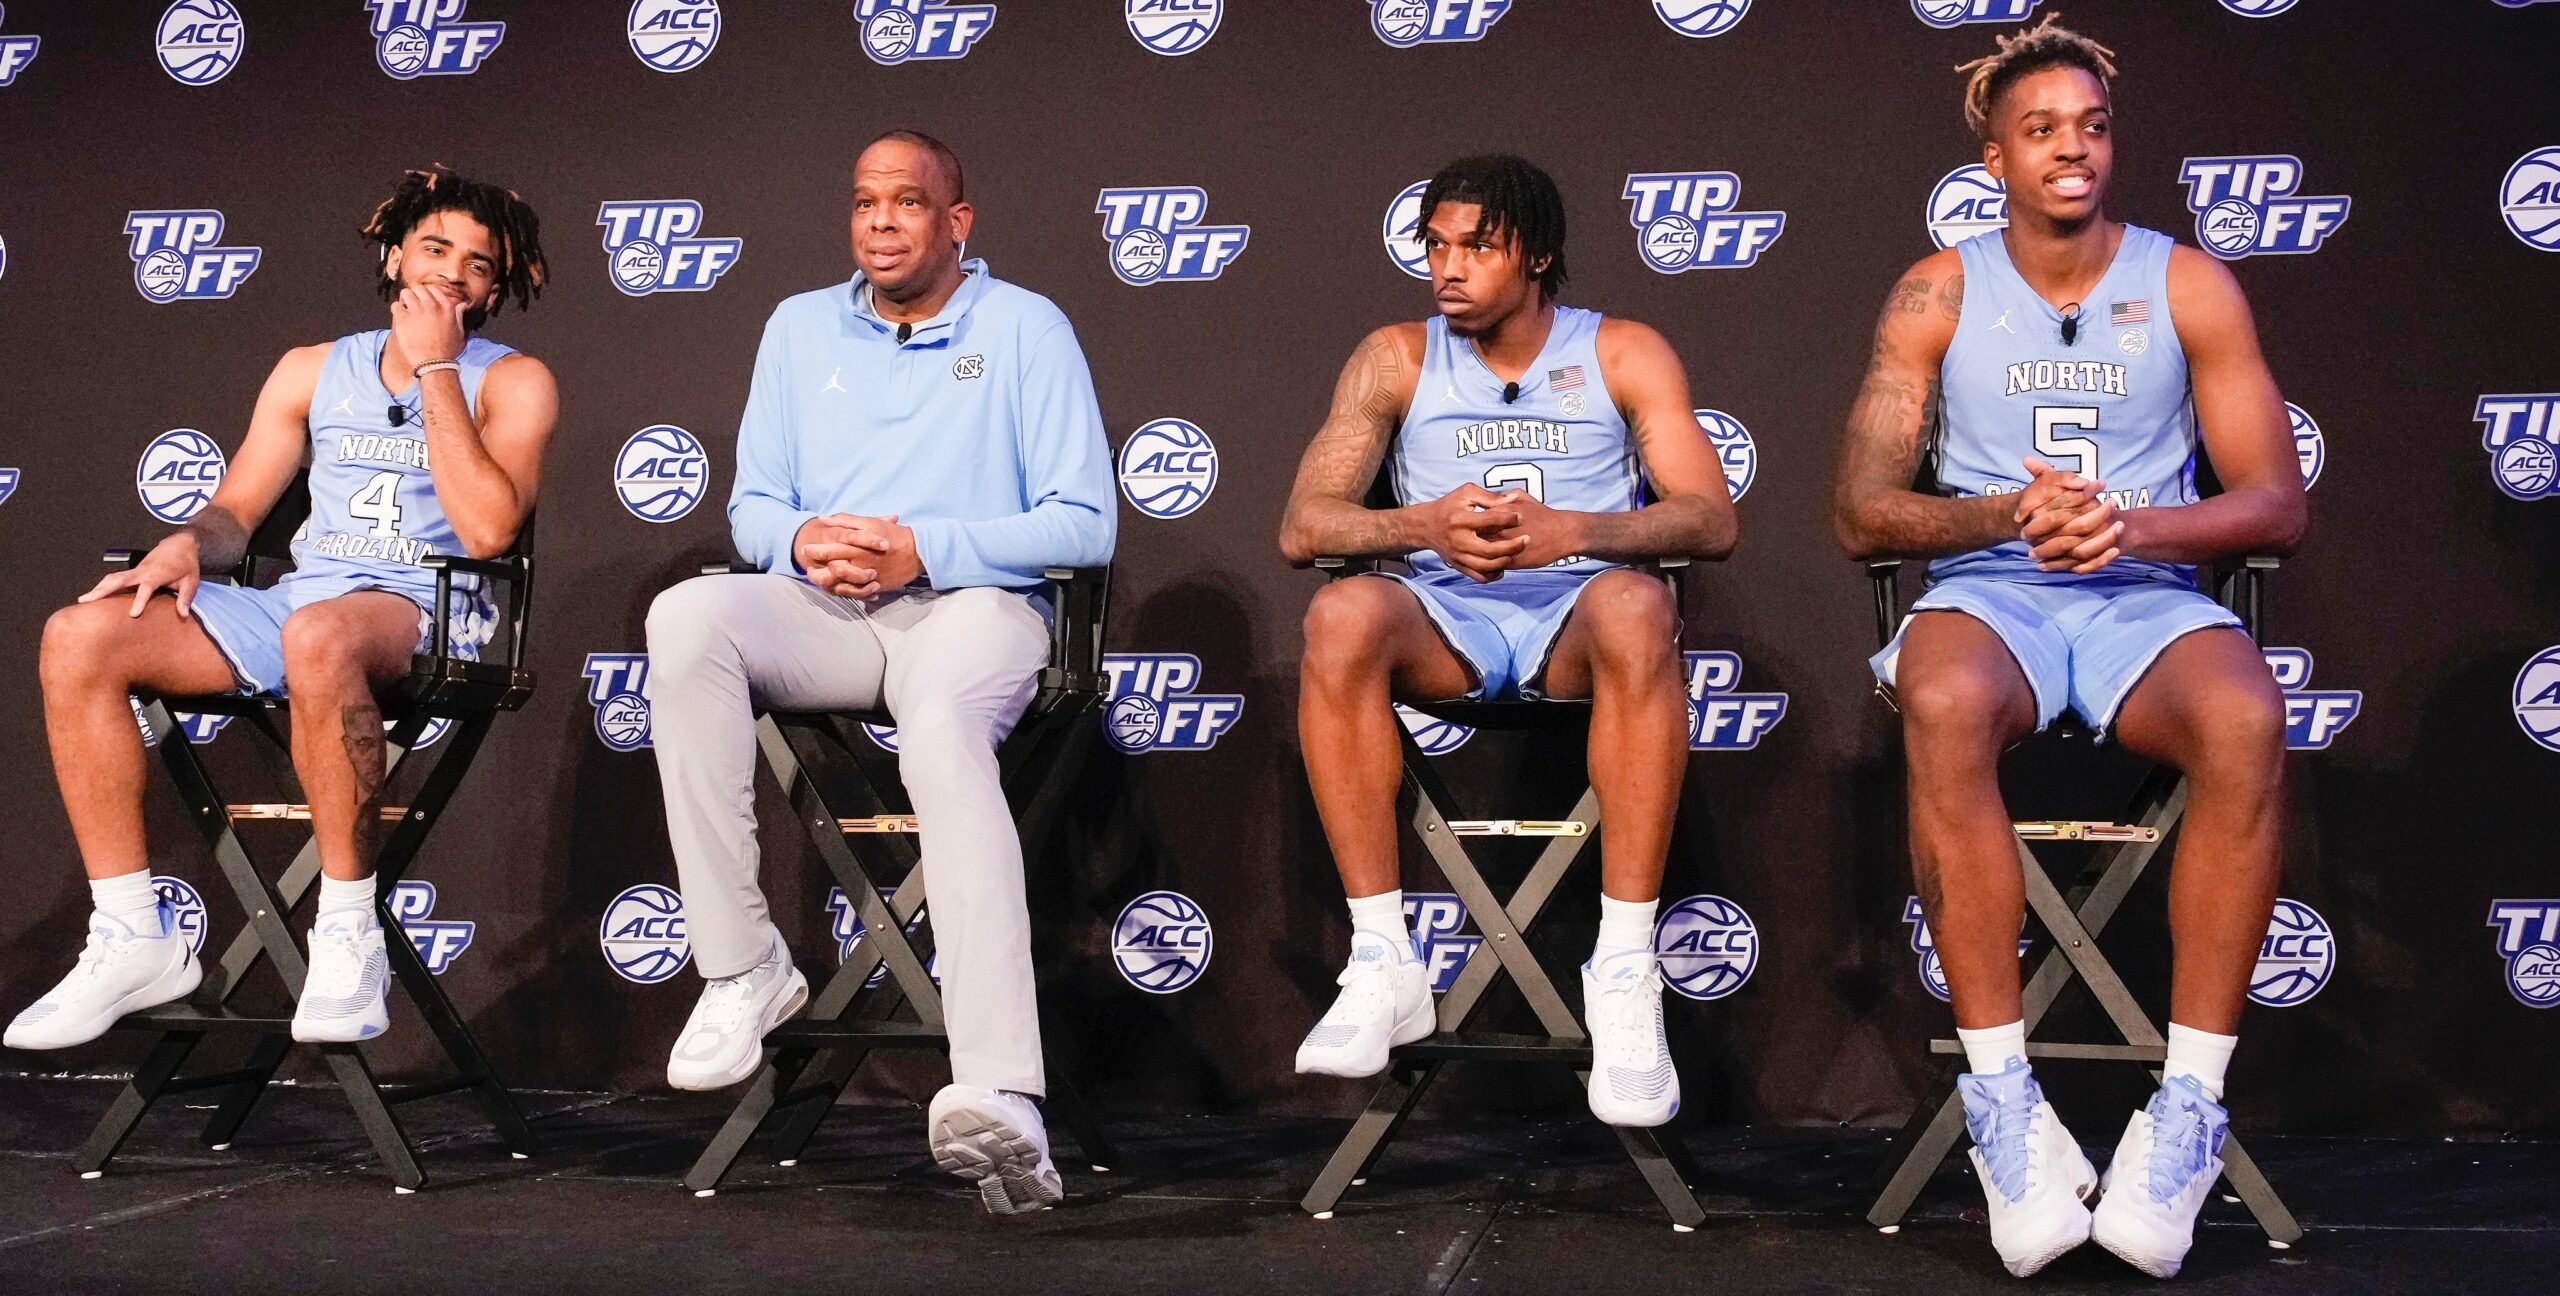 ‘More Motivated Than Ever’: UNC Basketball Programs Bring High Hopes to ACC Tip-Off